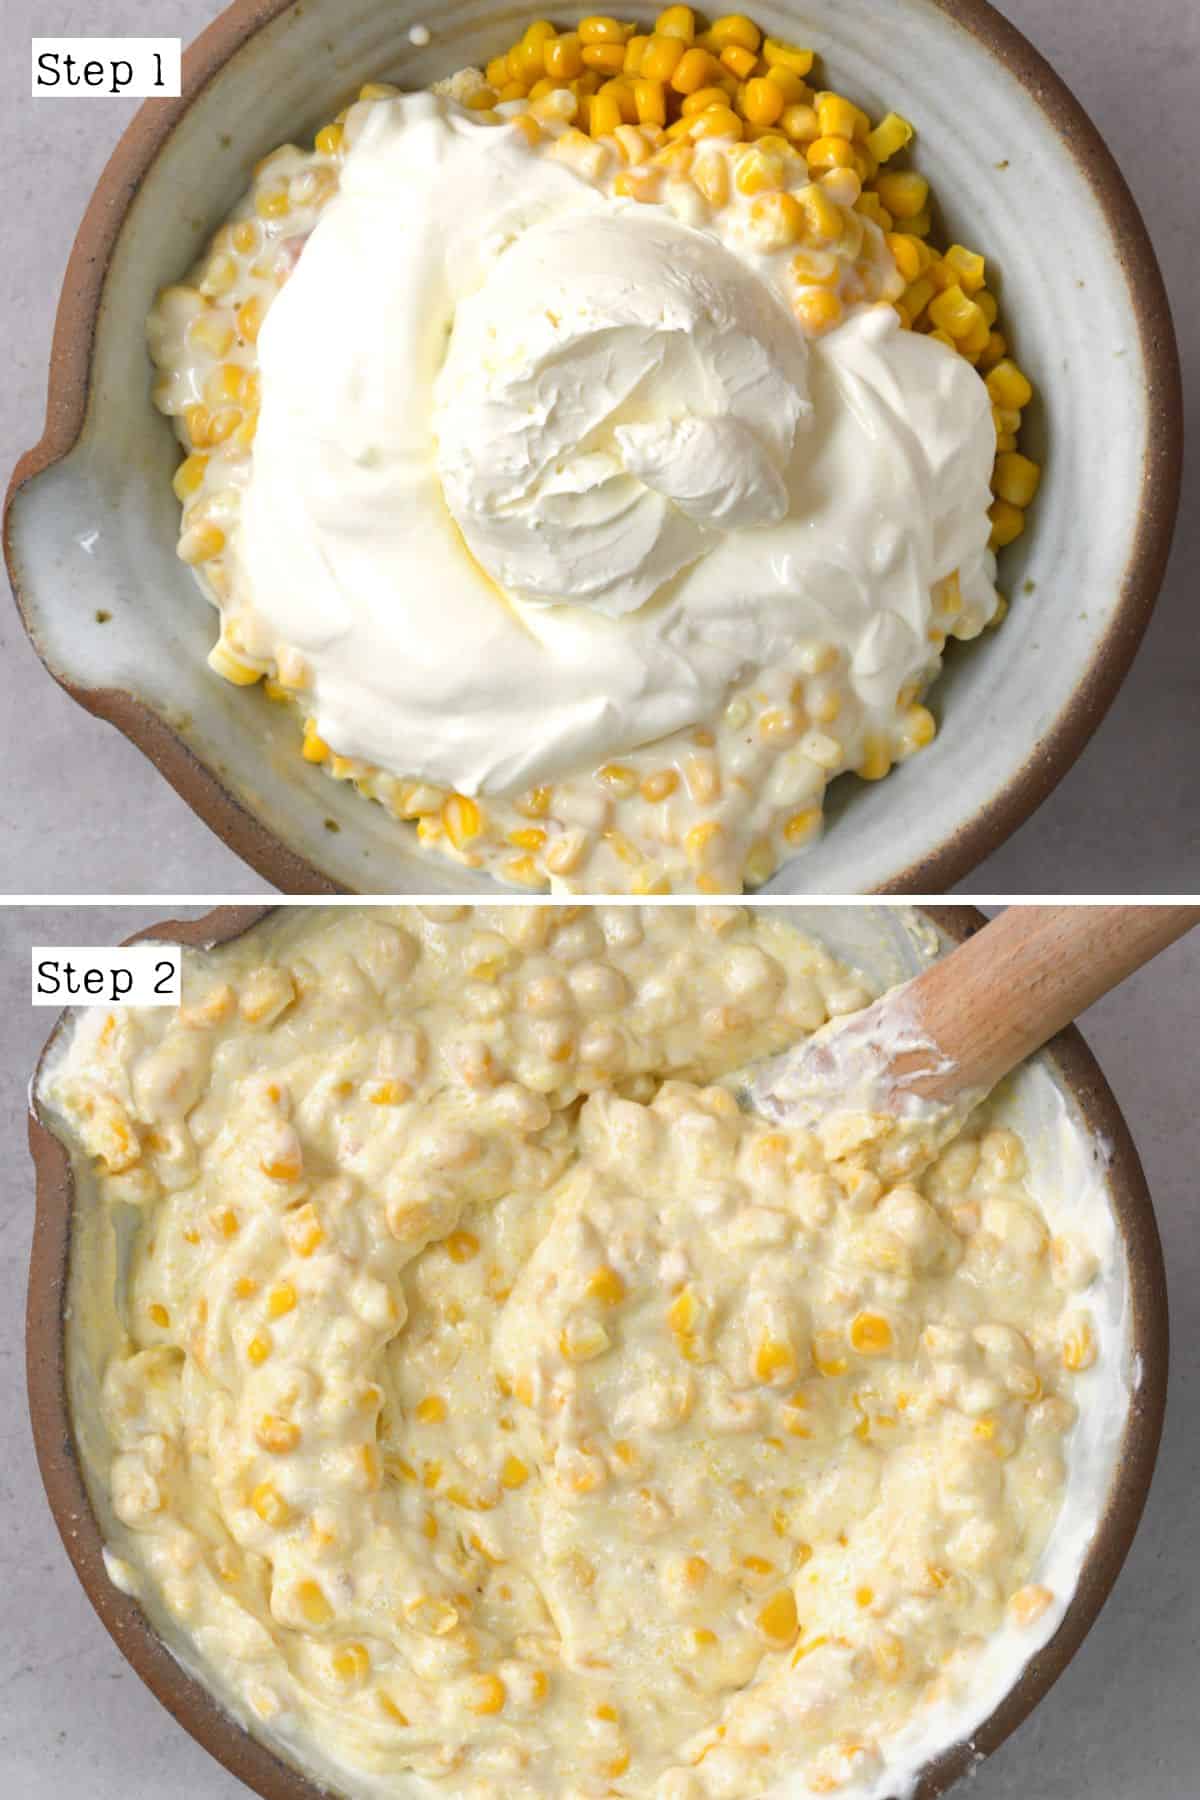 Steps for mixing ingredients for corn casserole